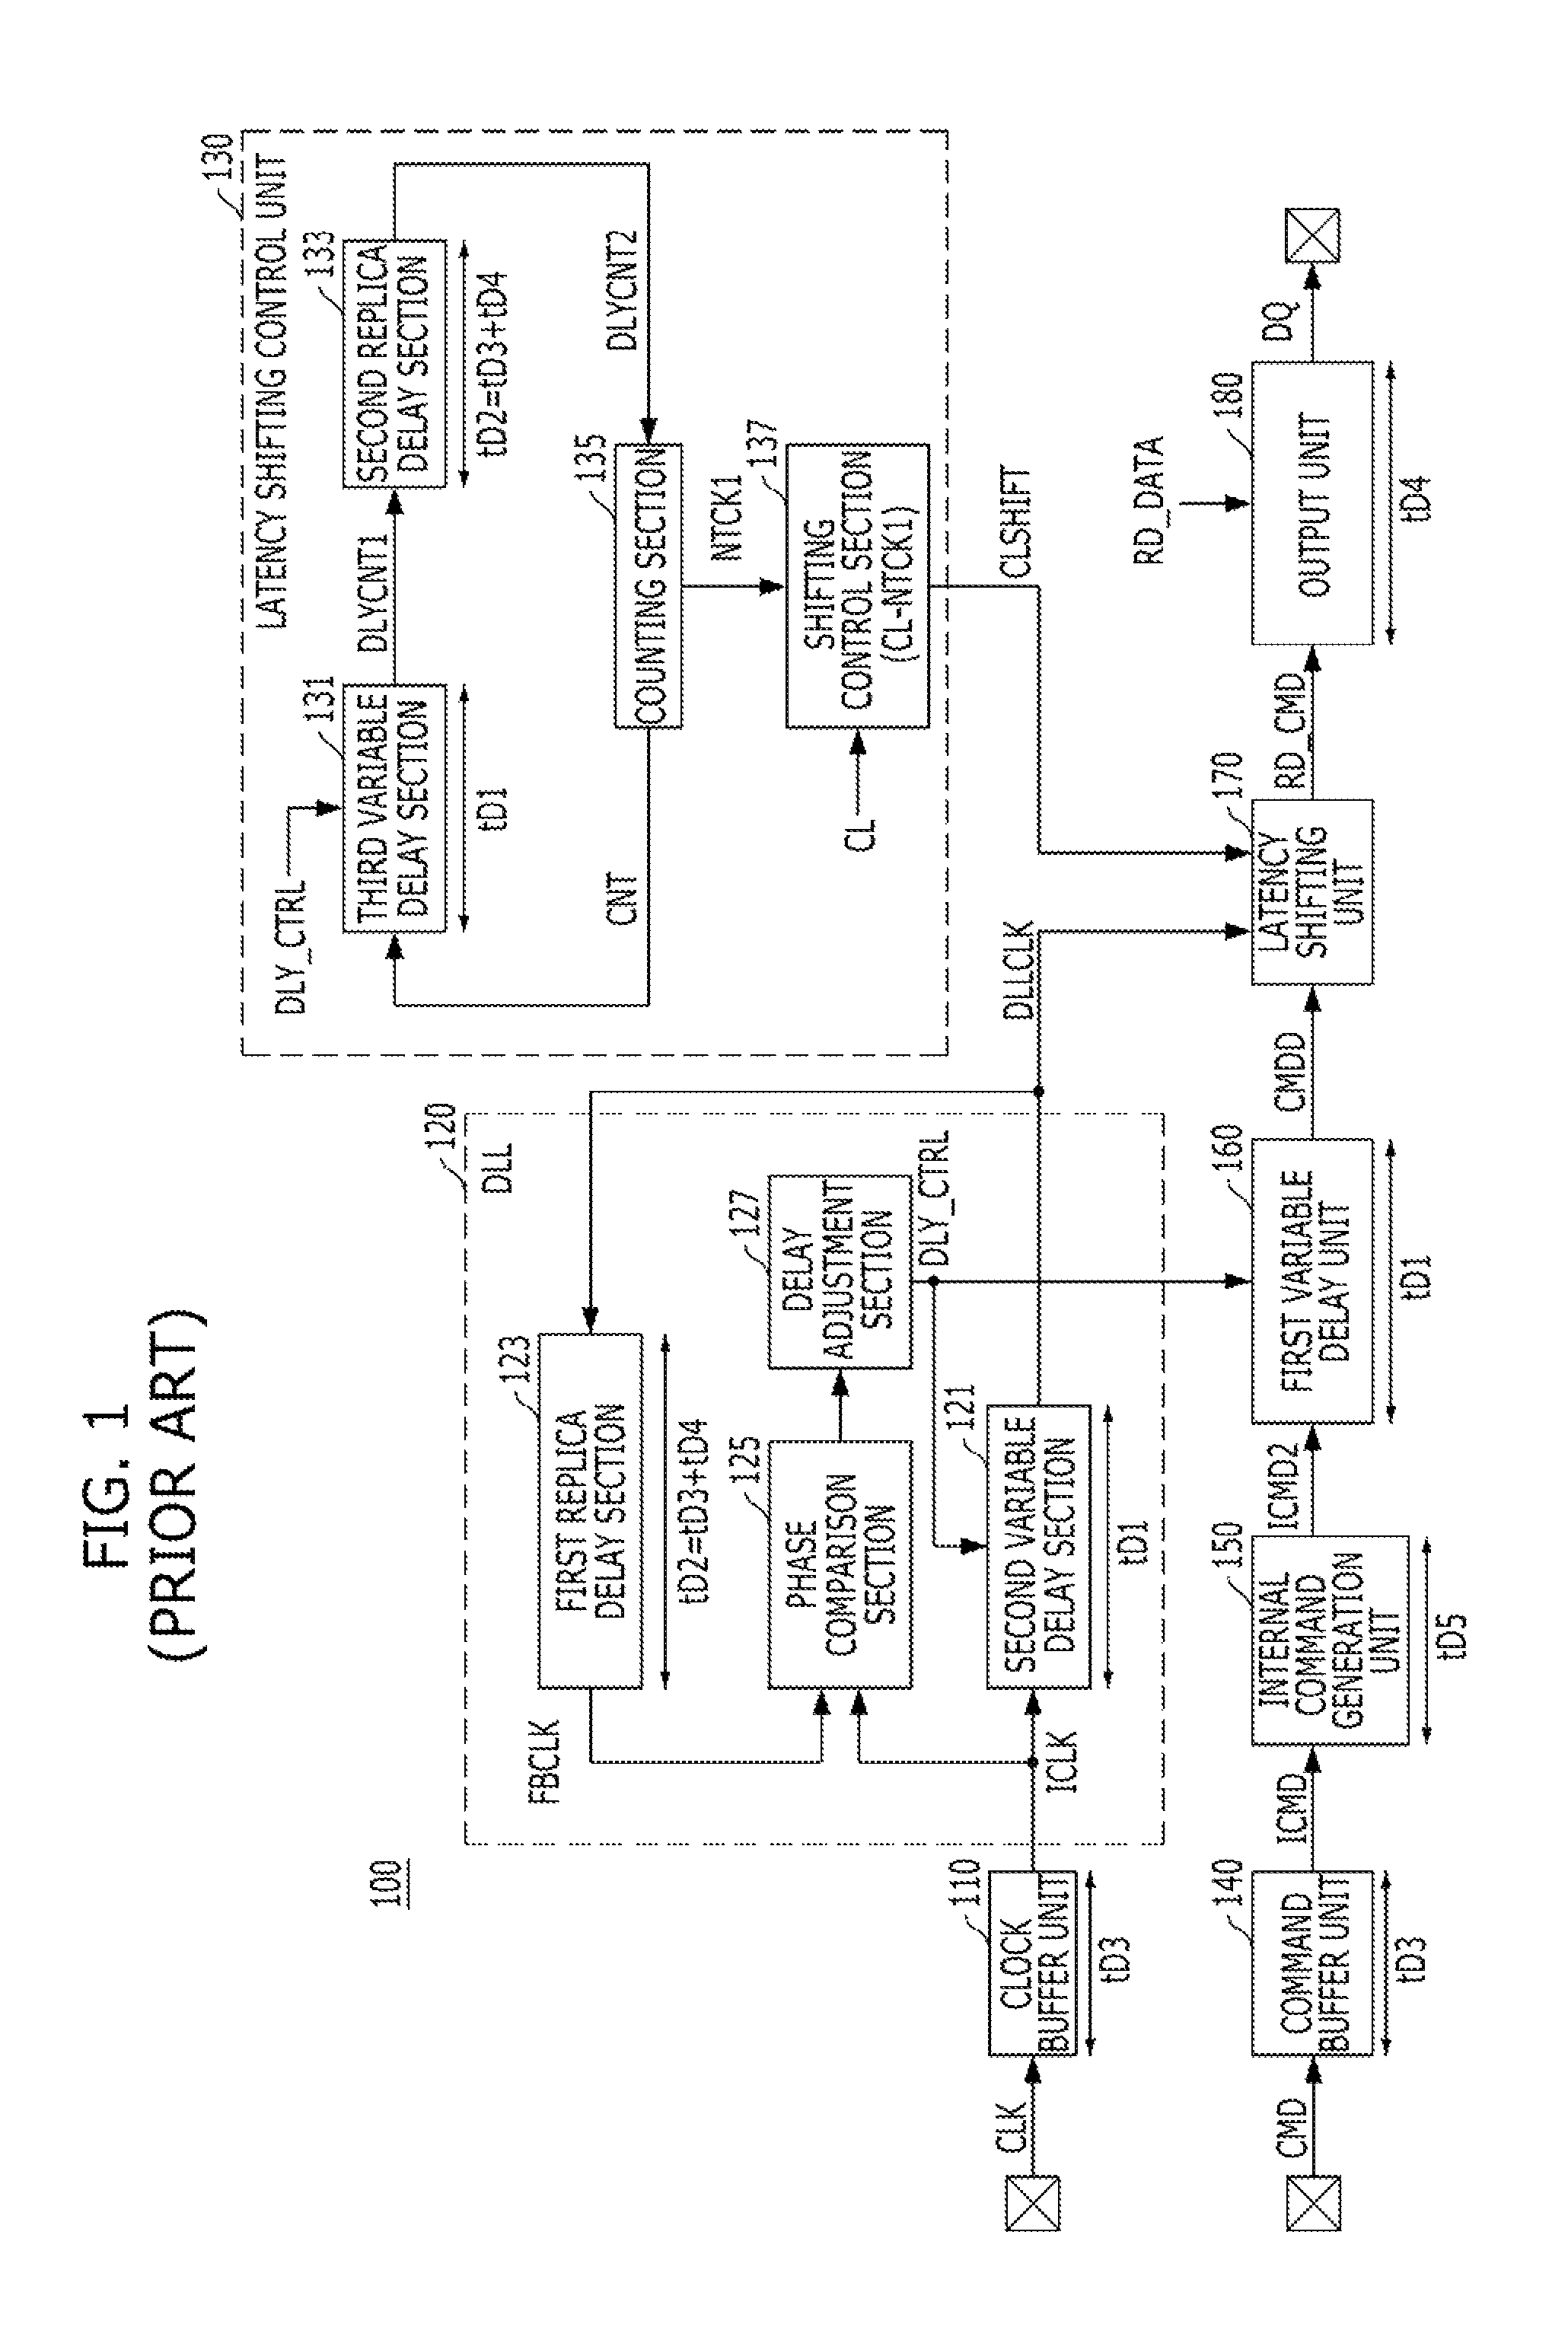 Synchronous semiconductor device having delay locked loop for latency control